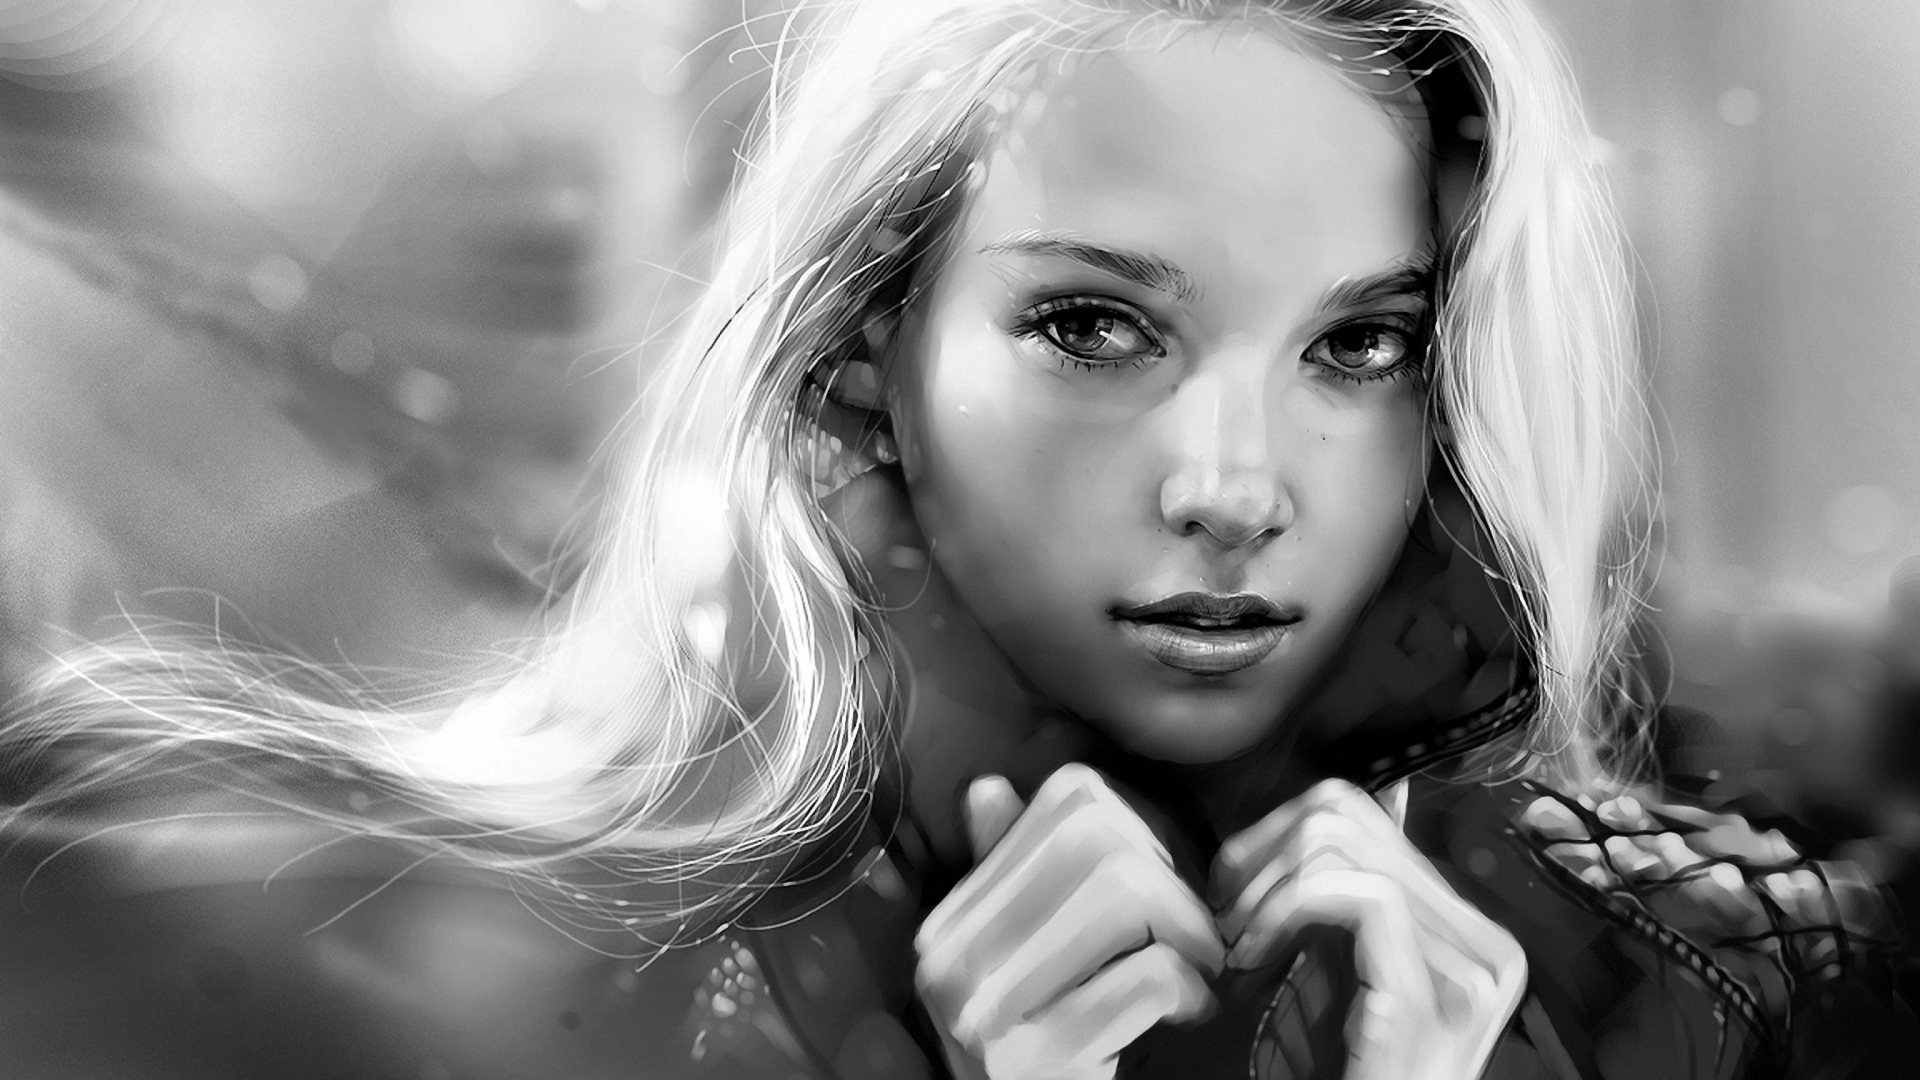 Black And White Blonde Painting wallpaper 1920x1080